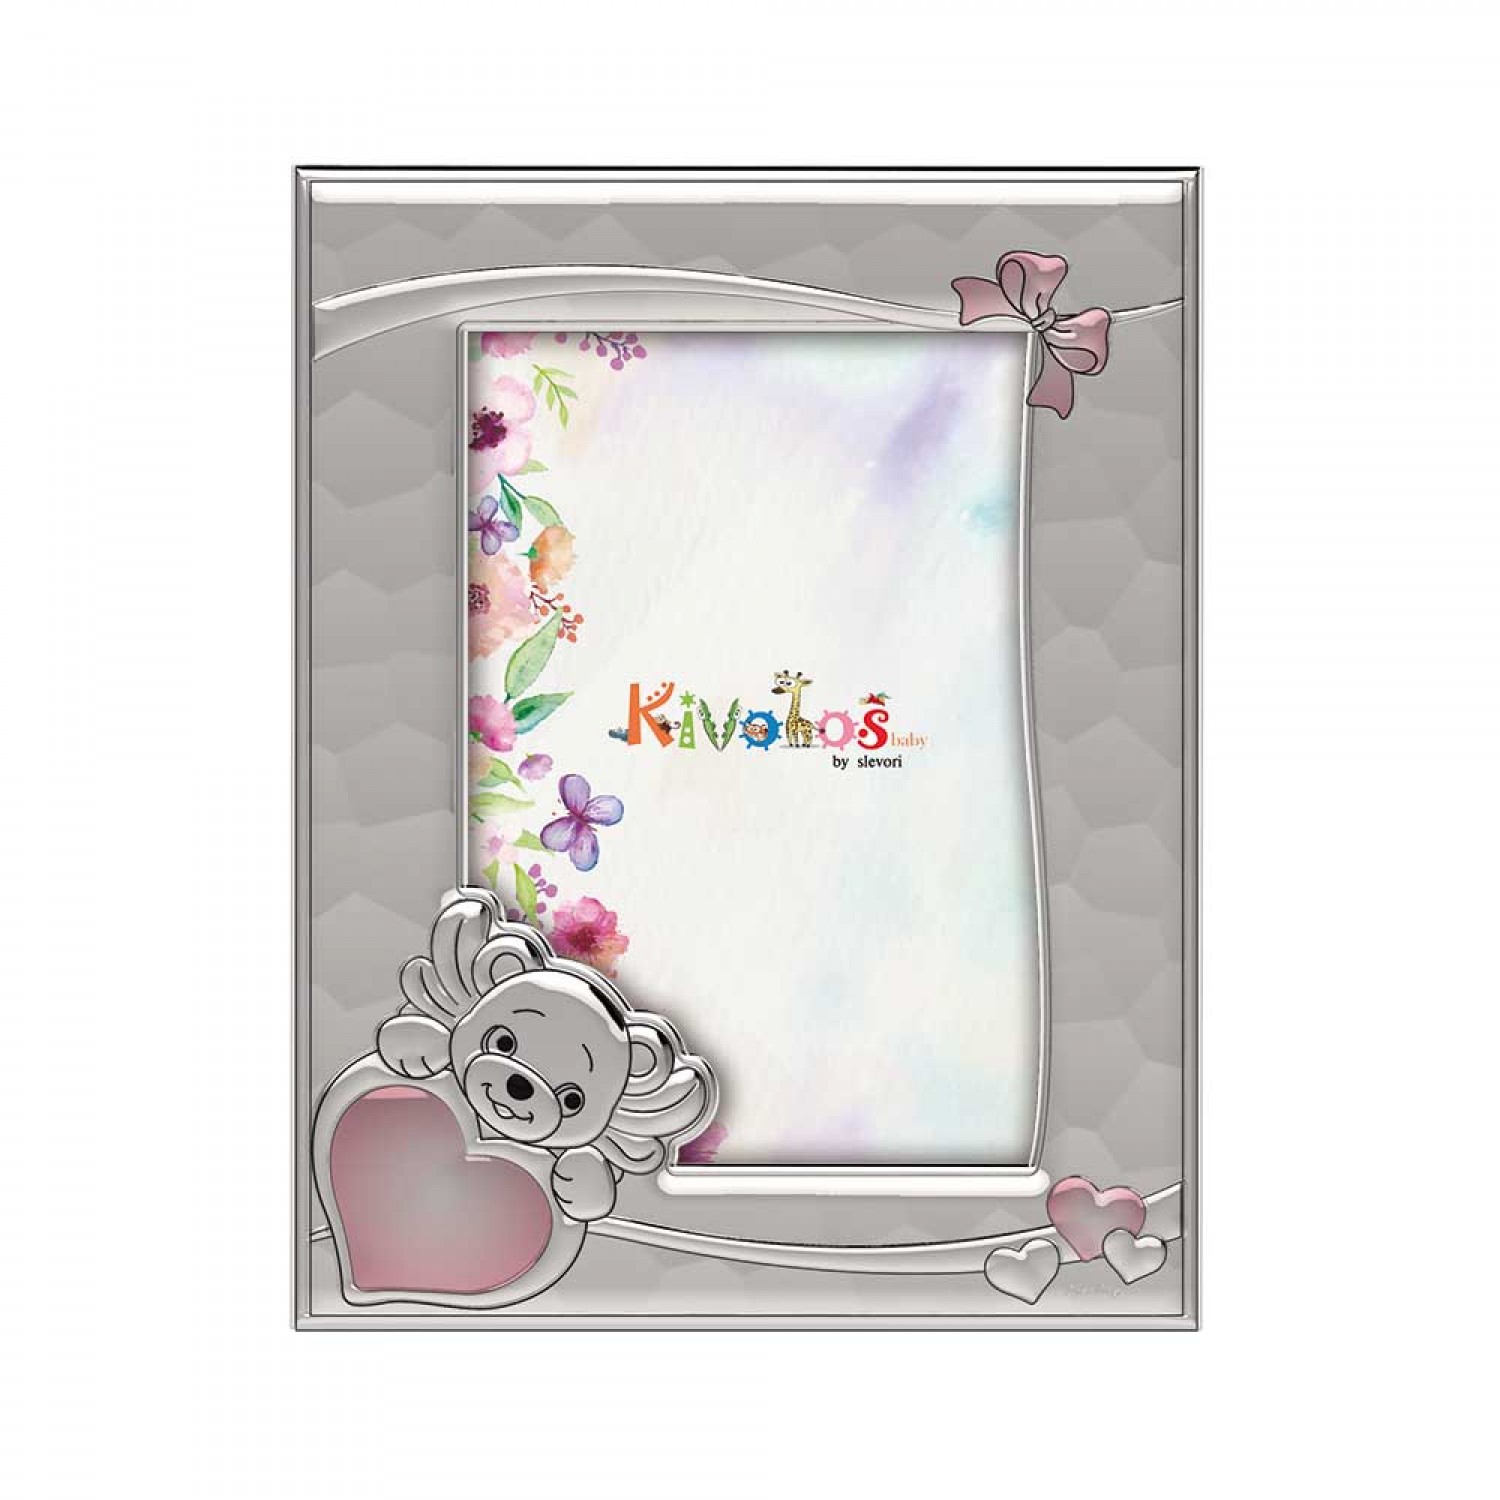 Childrens frame for little girl with teddy bear and hearts 13X18.